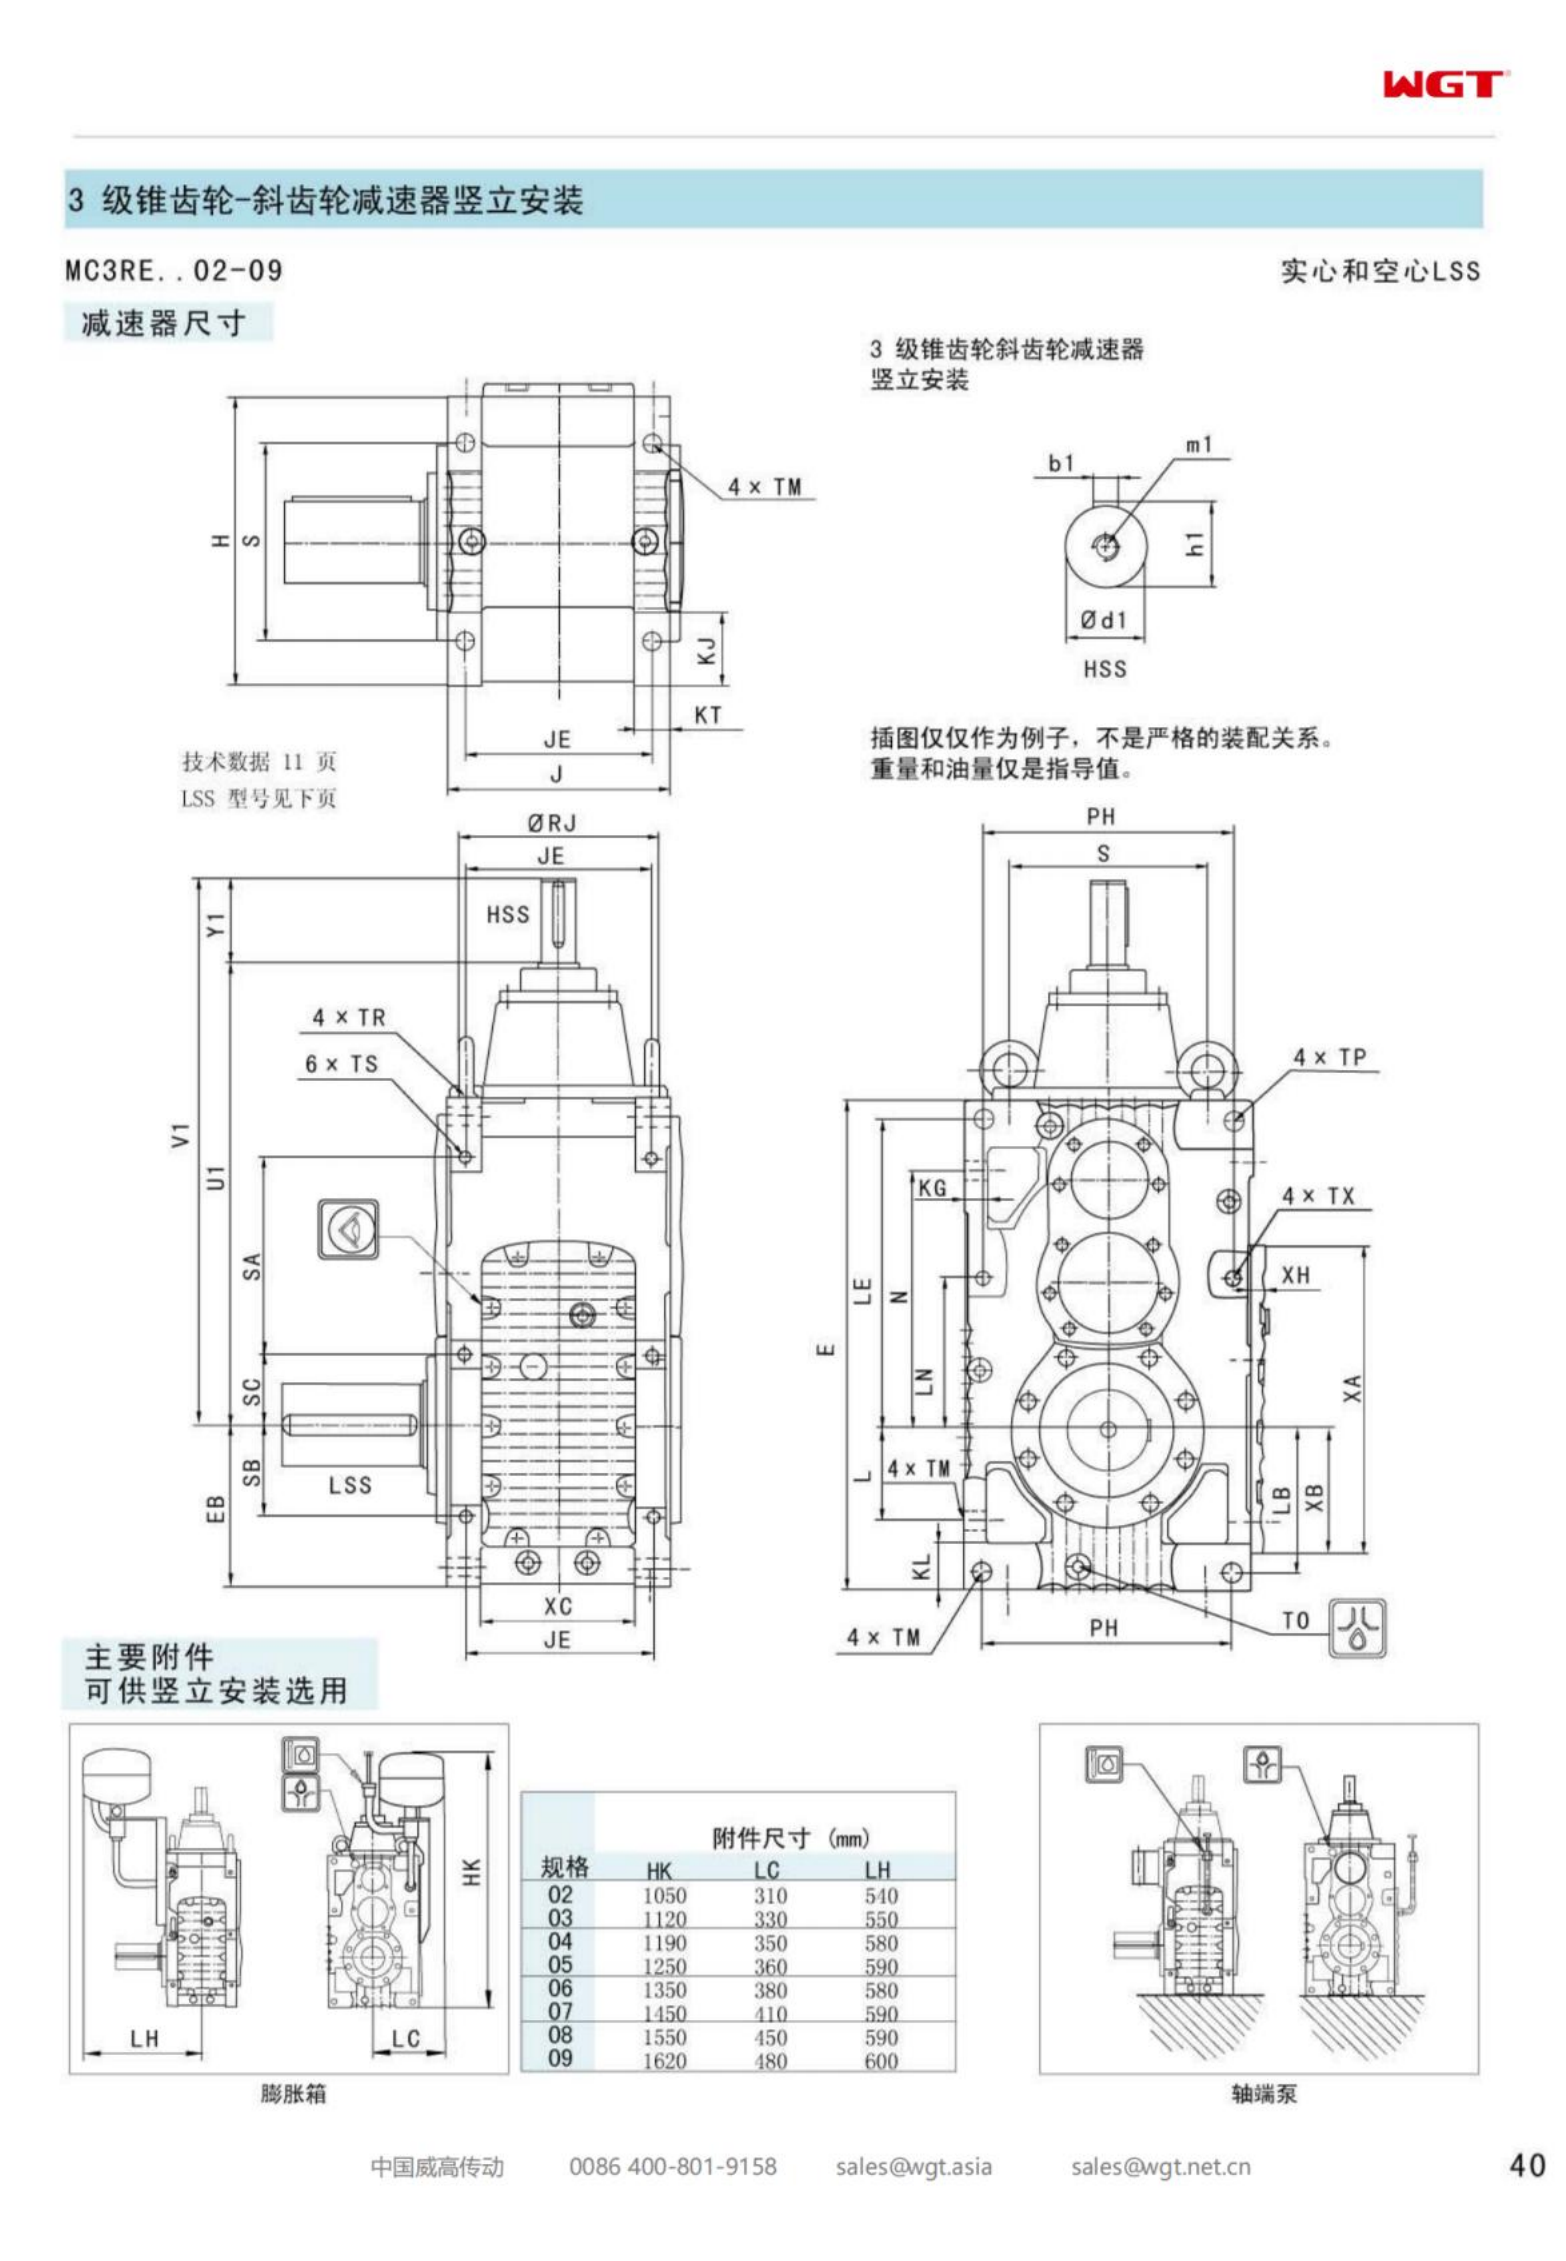 MC3RESF07 replaces _SEW_MC_Series gearbox (patent)